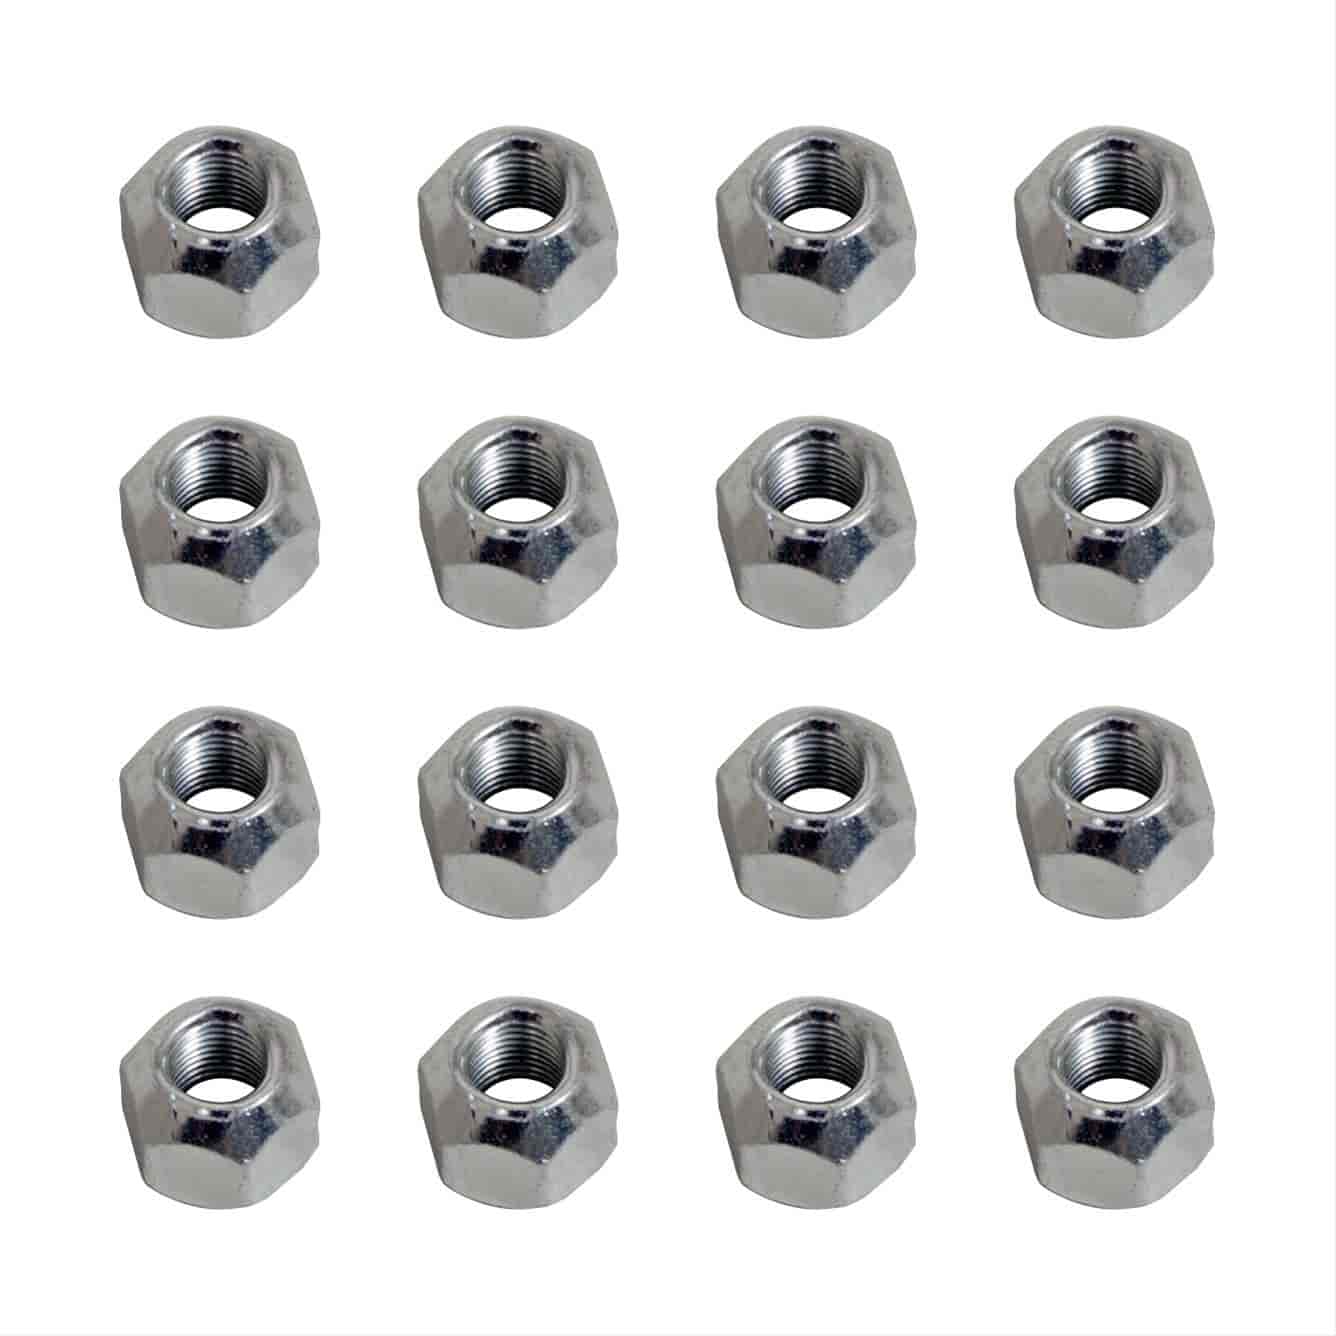 Rocker Arm Nuts for Small Block Chevy Stamped Steel Rocker Arms